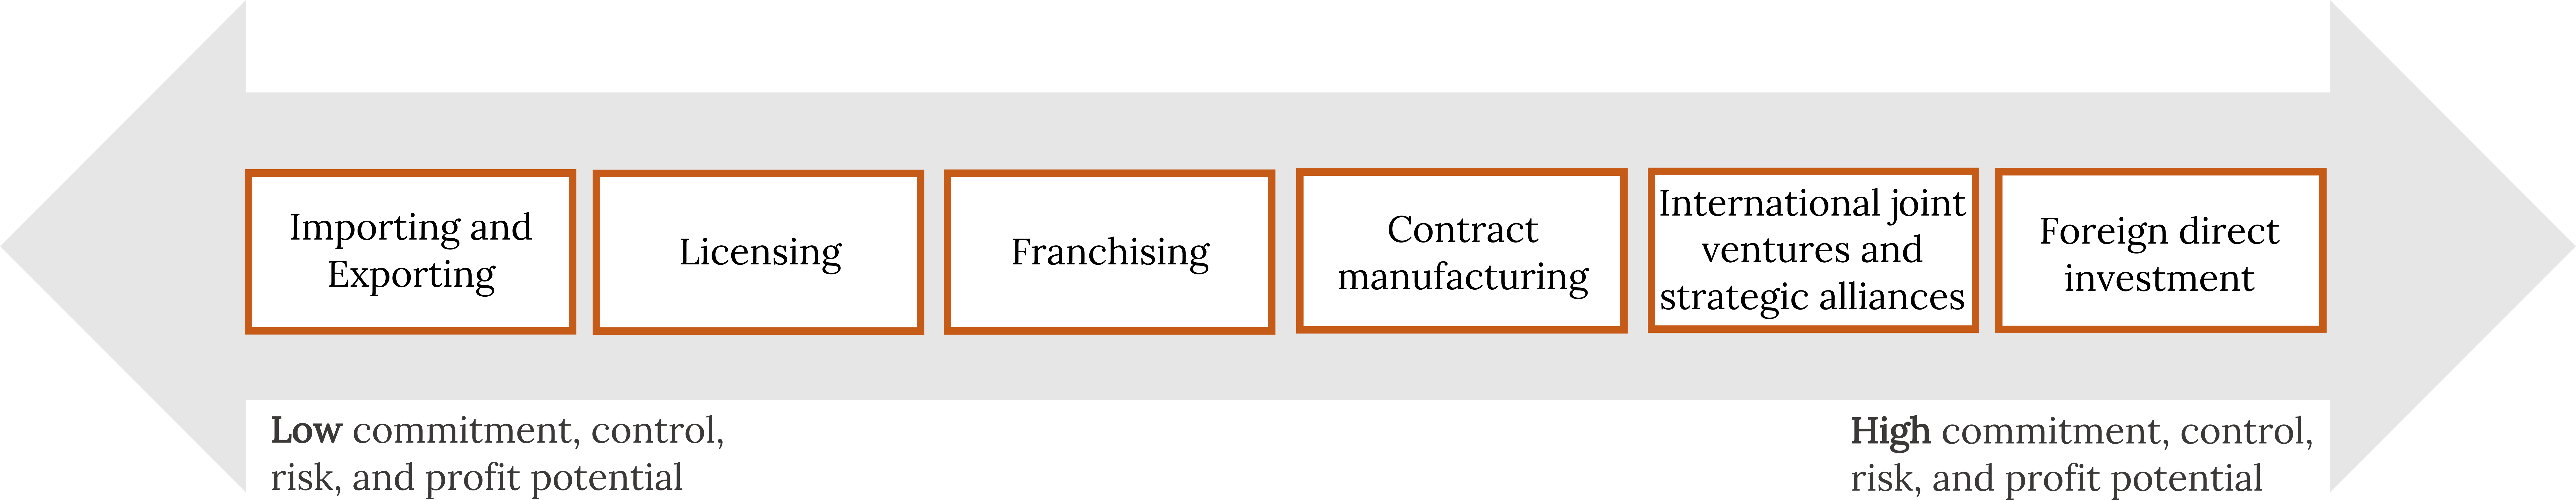 Large arrow pointing left and right. The left side of the arrow is labeled 'Low commitment, control, risk, and profit potential.' The right side of the arrow is labeled 'High commitment, control, risk, and profit potential.' Boxes inside arrow (from left to right): importing and exporting, licensing, franchising, contract manufacturing, international joint ventures and strategic alliances, foreign direct investment.